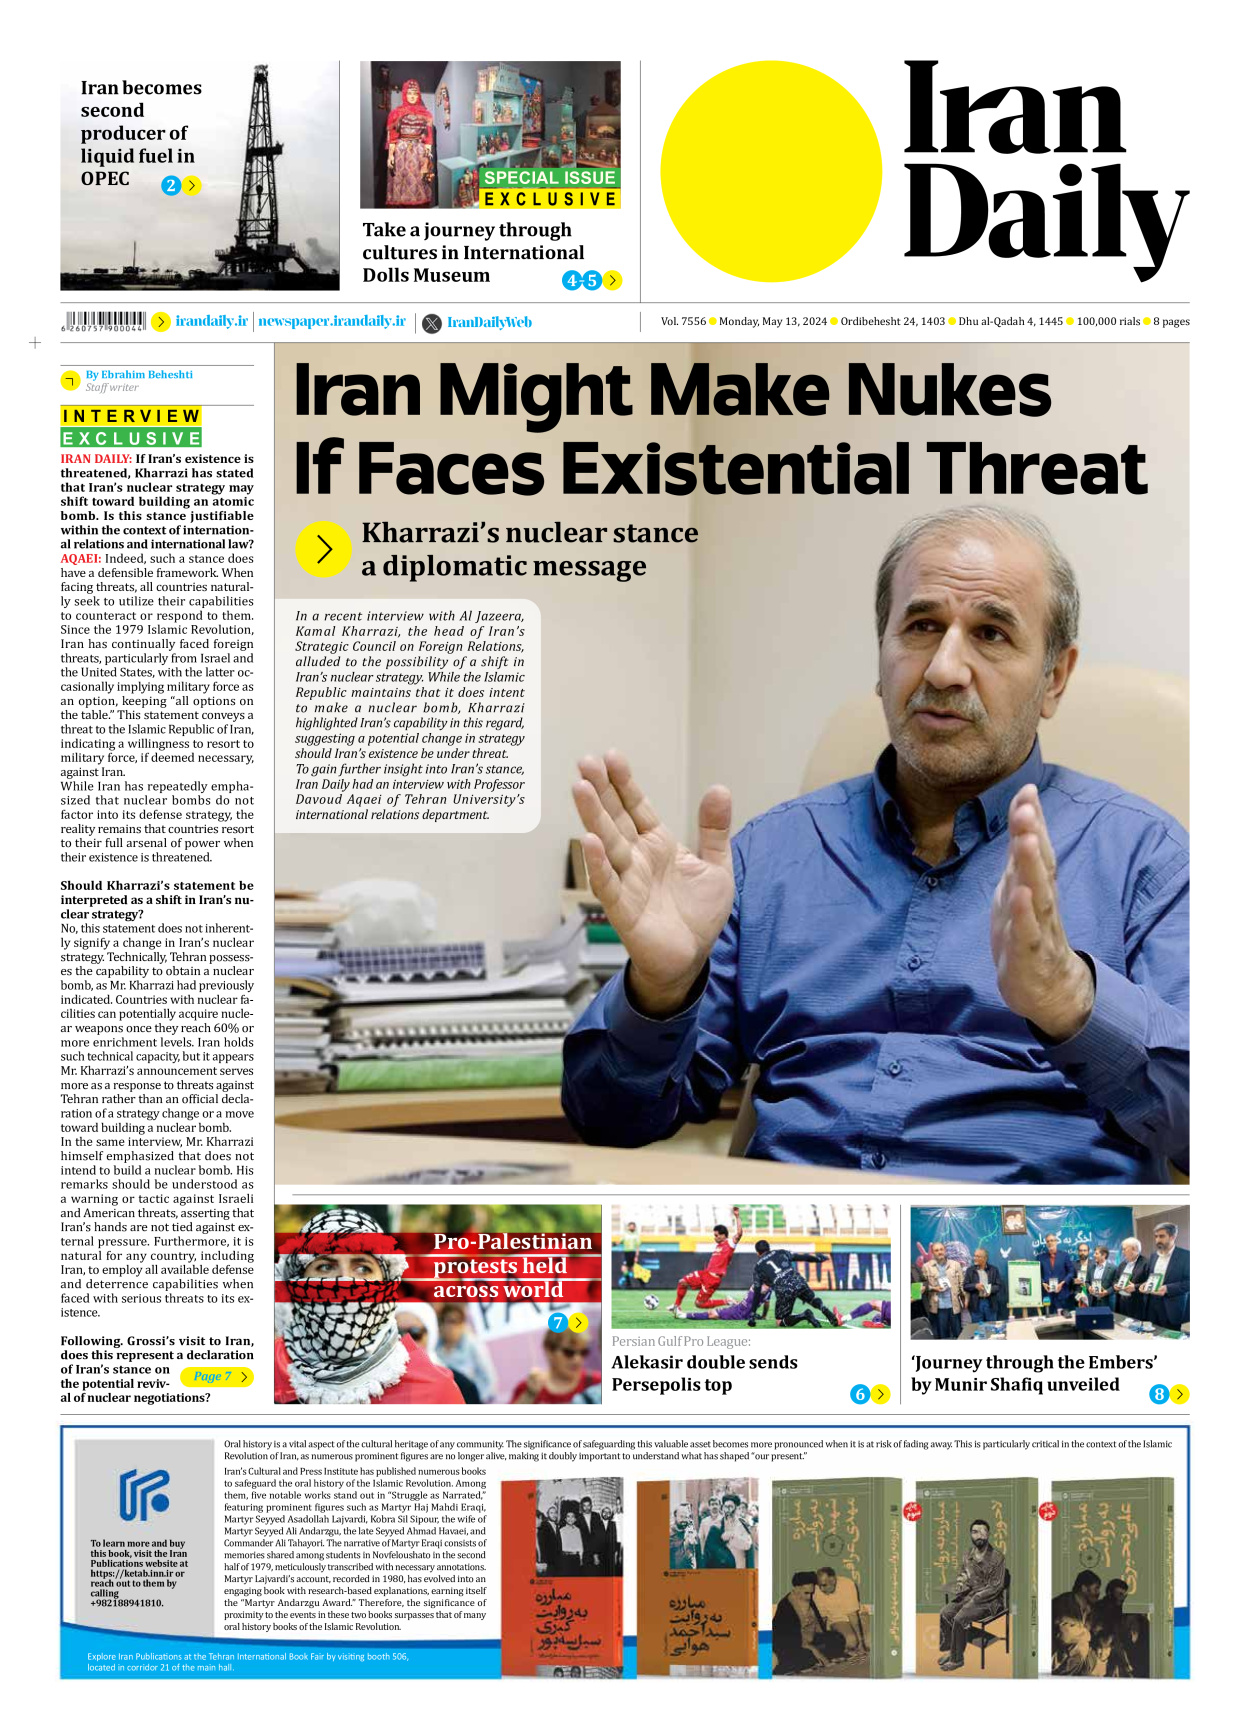 Iran Daily - Number Seven Thousand Five Hundred and Fifty Six - 13 May 2024 - Page 1